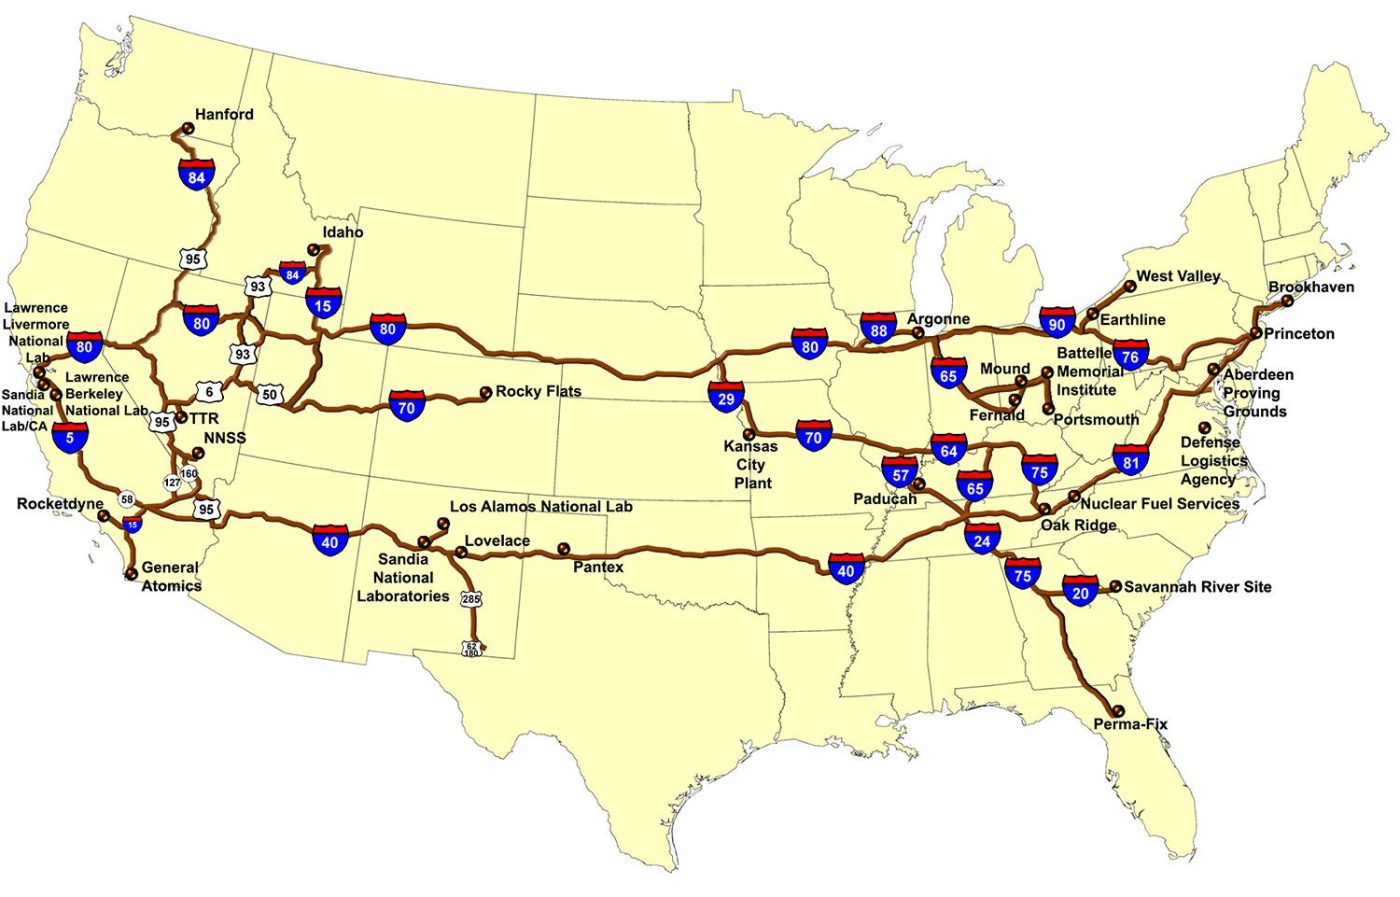 A United States map shows depicts routes generally used to transport waste shipments to the NNSS.